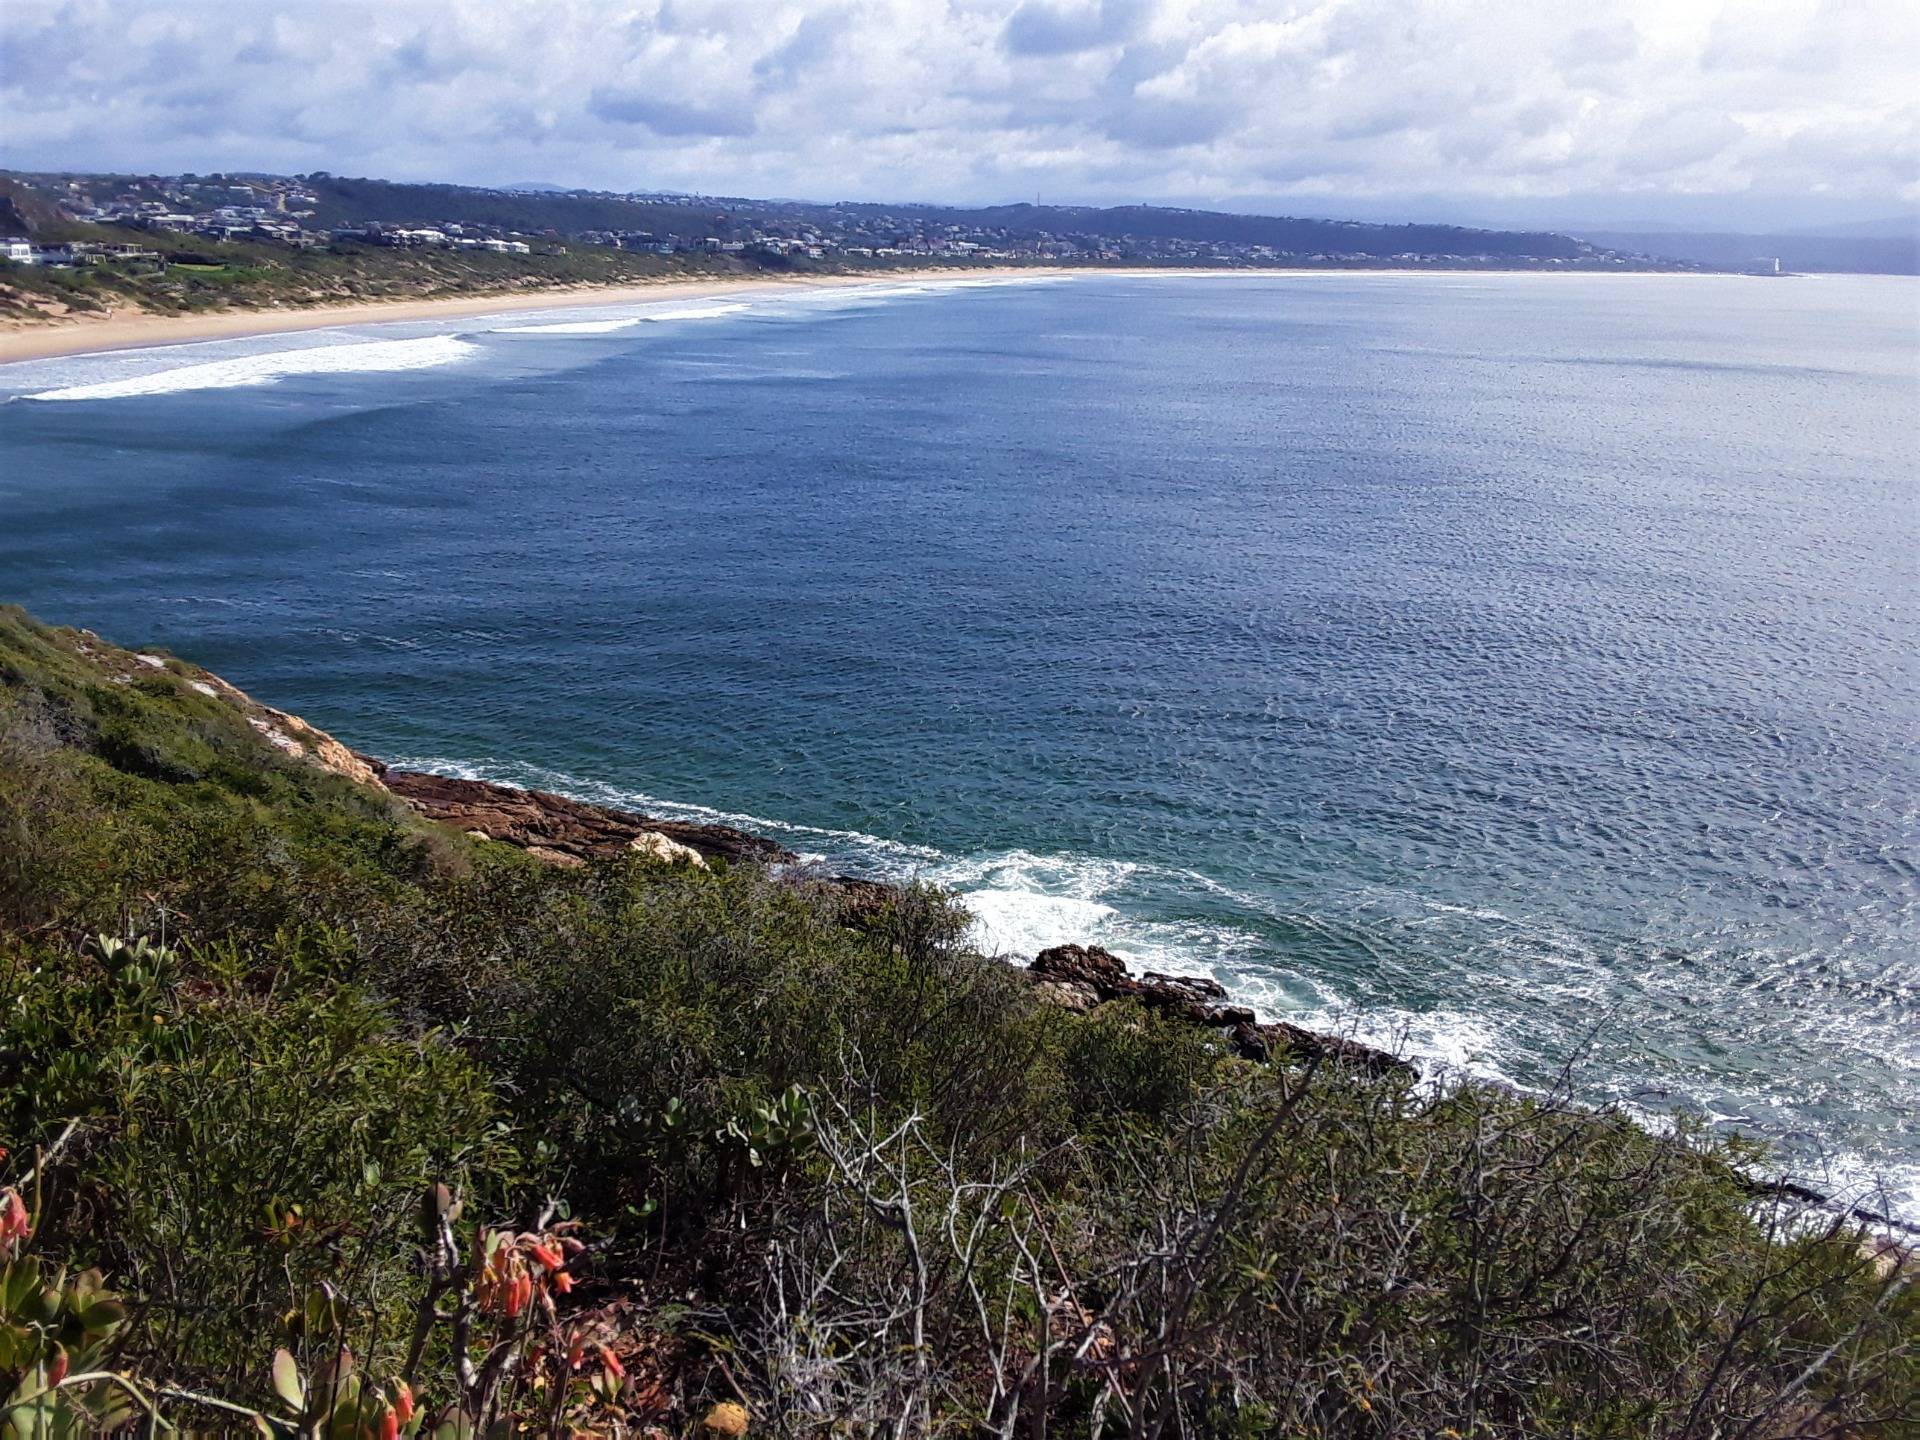 The long stretch of Robberg beach with the town of Plettenberg Bay in the background